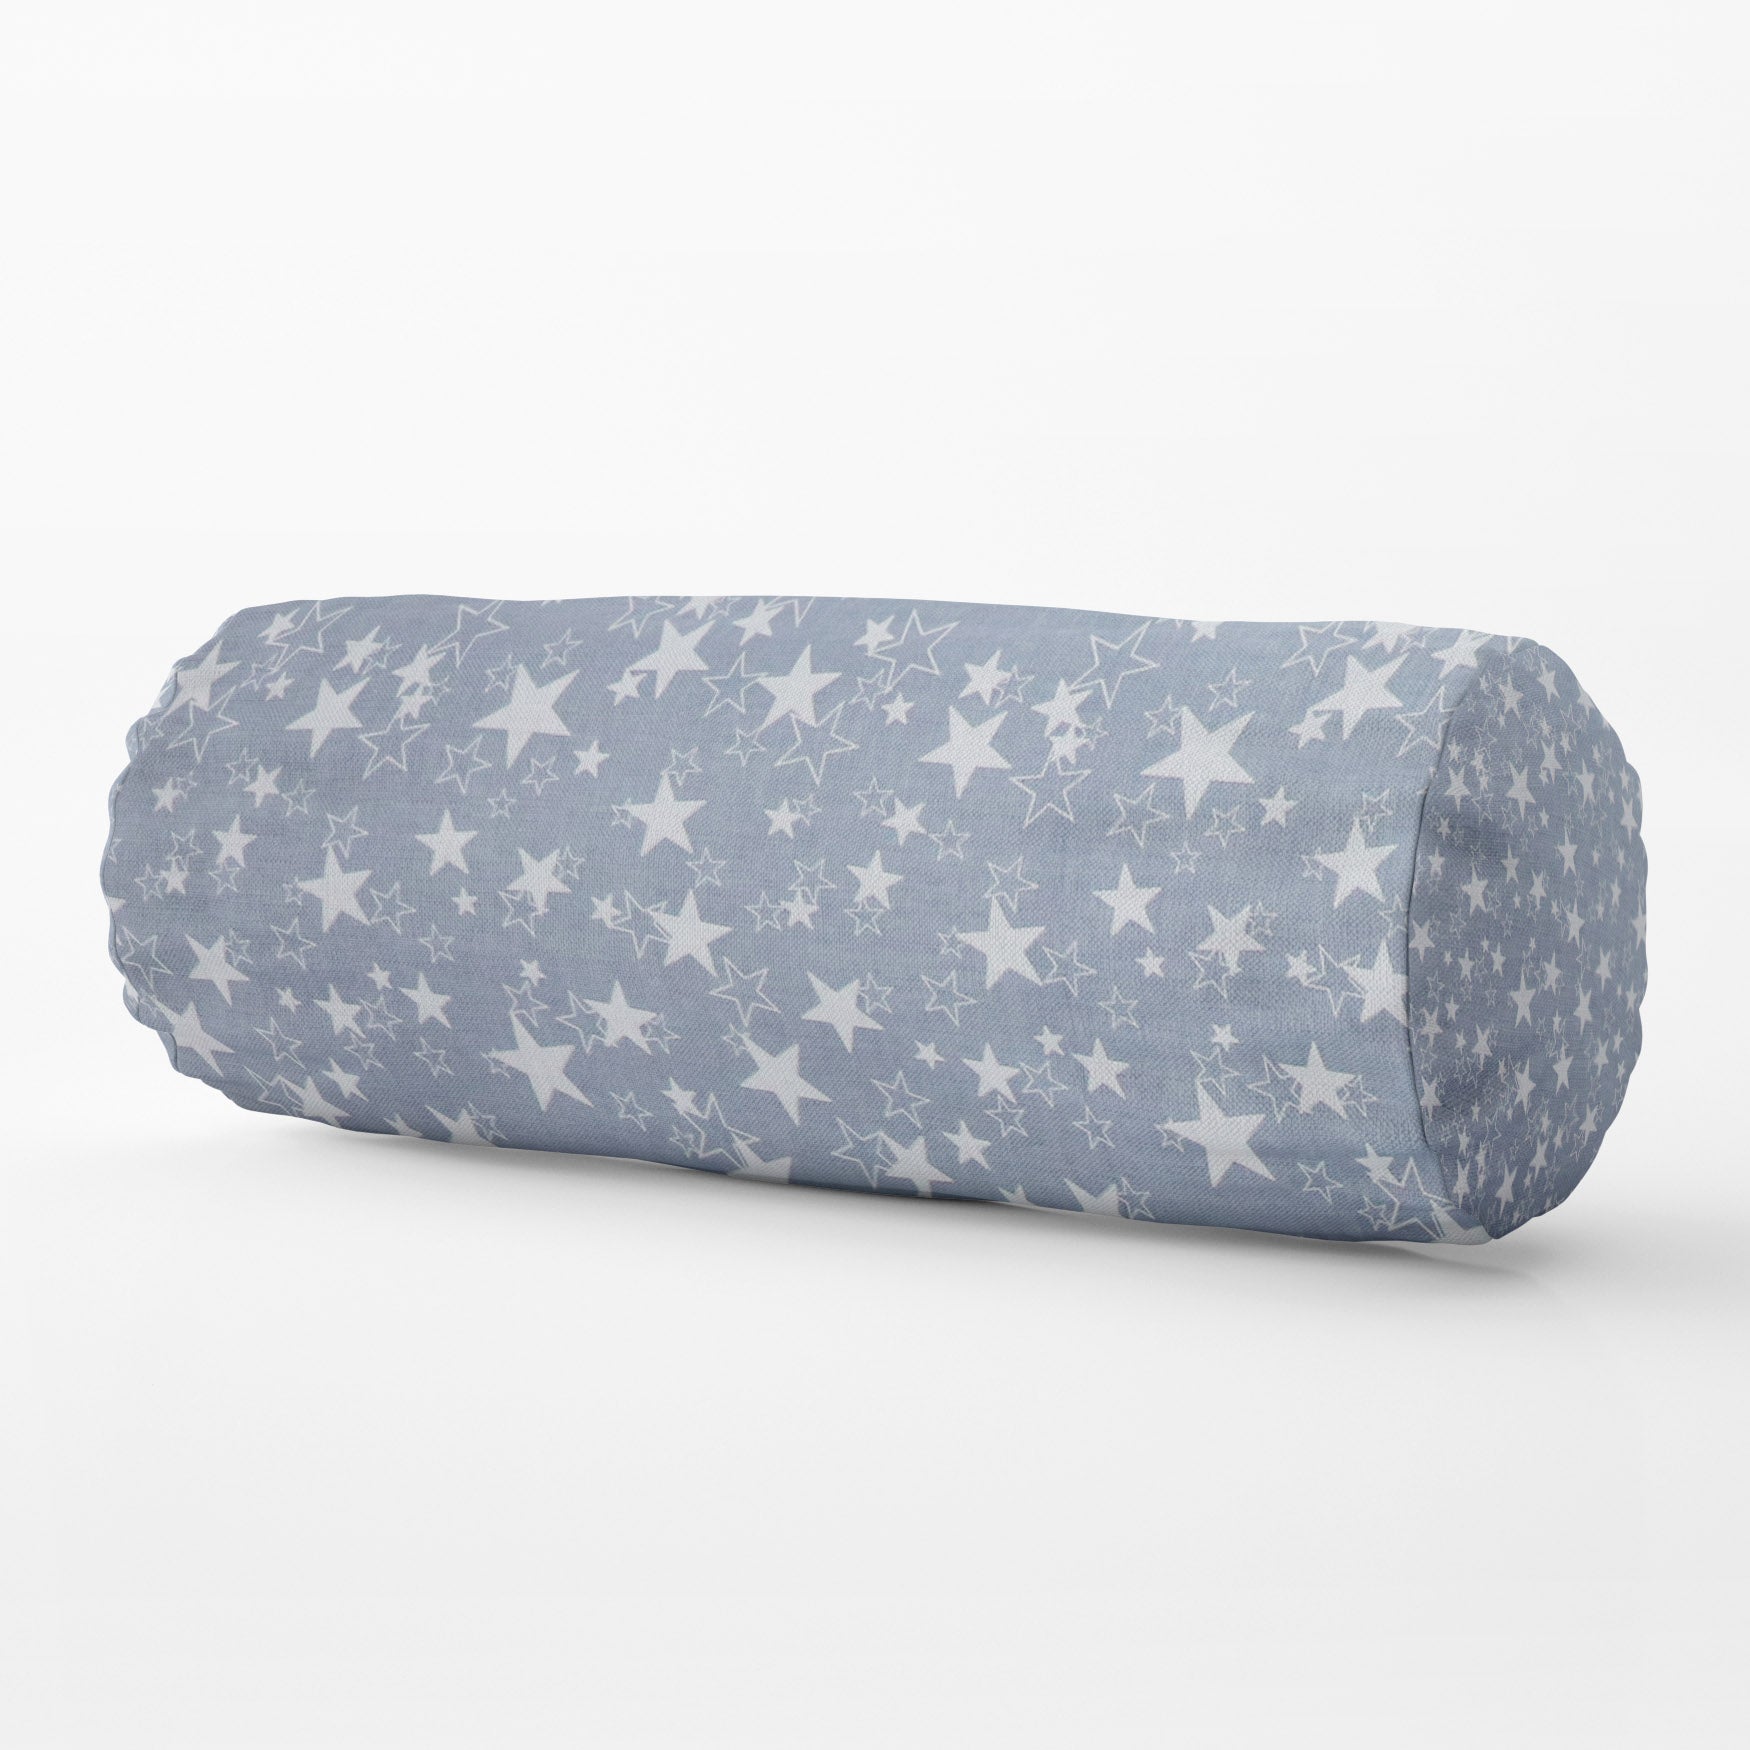 Bolster Pillows With Removable Cover - Grey Star